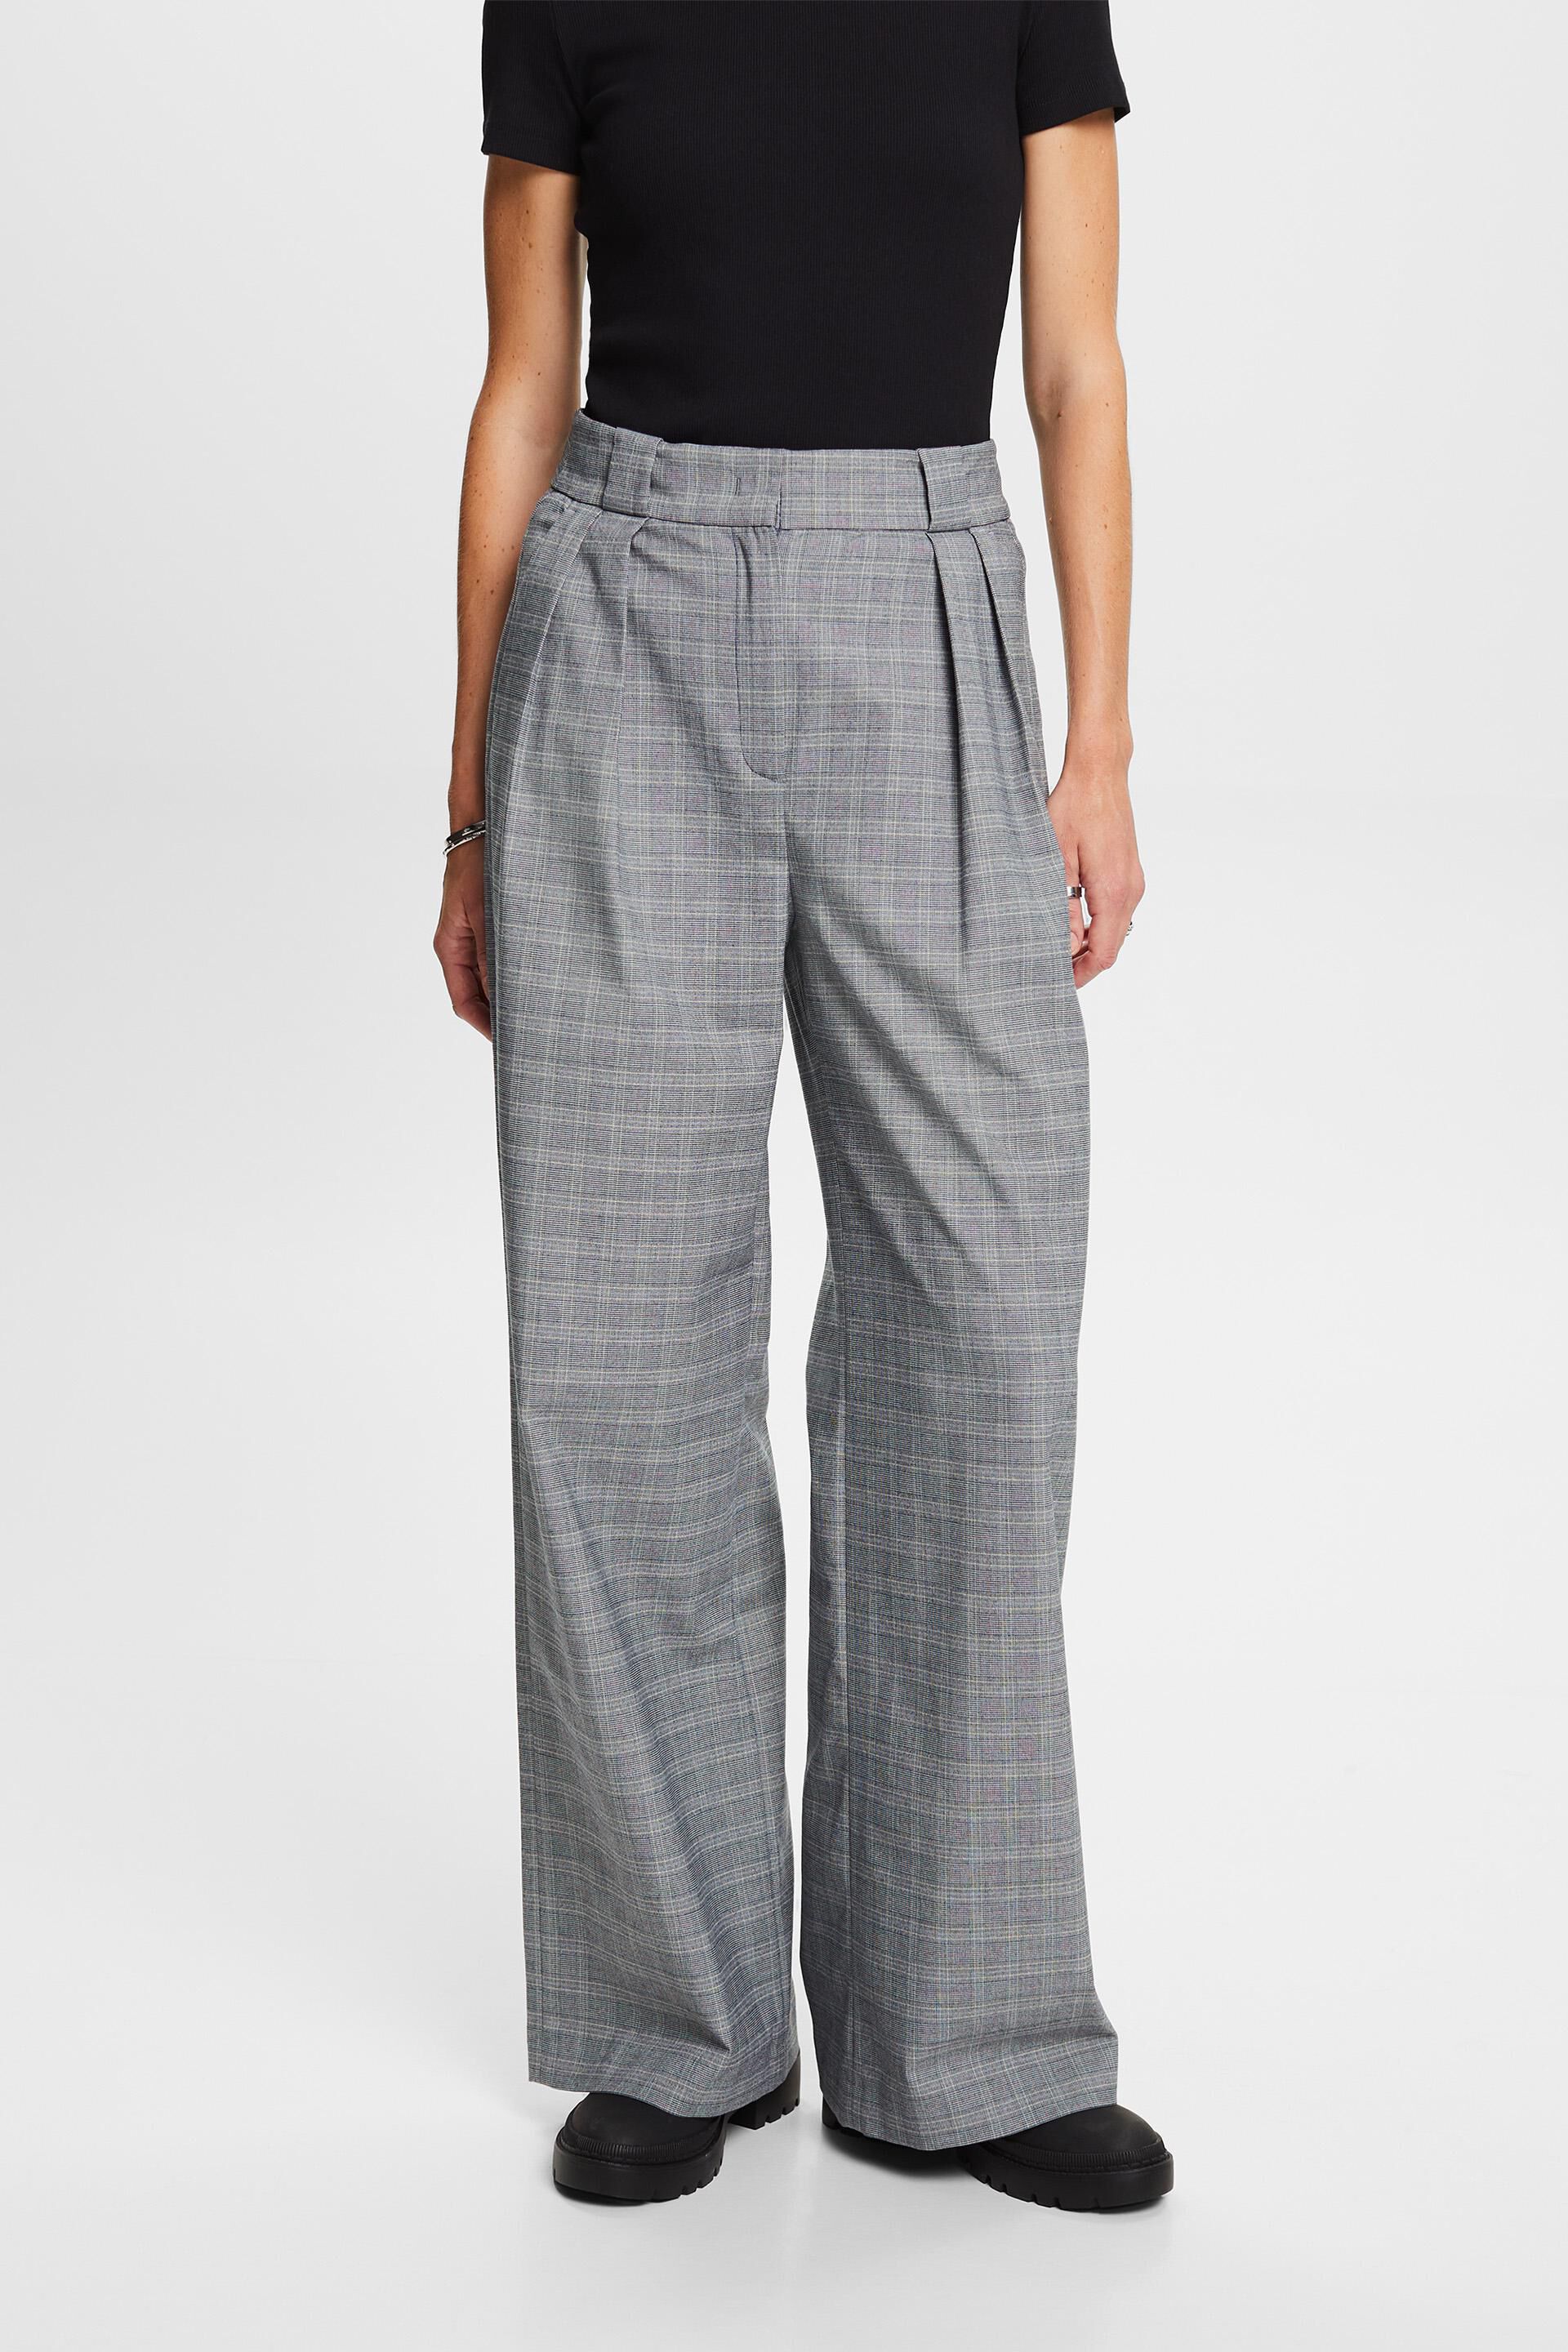 Esprit Match: Wales & of Prince Mix checked trousers